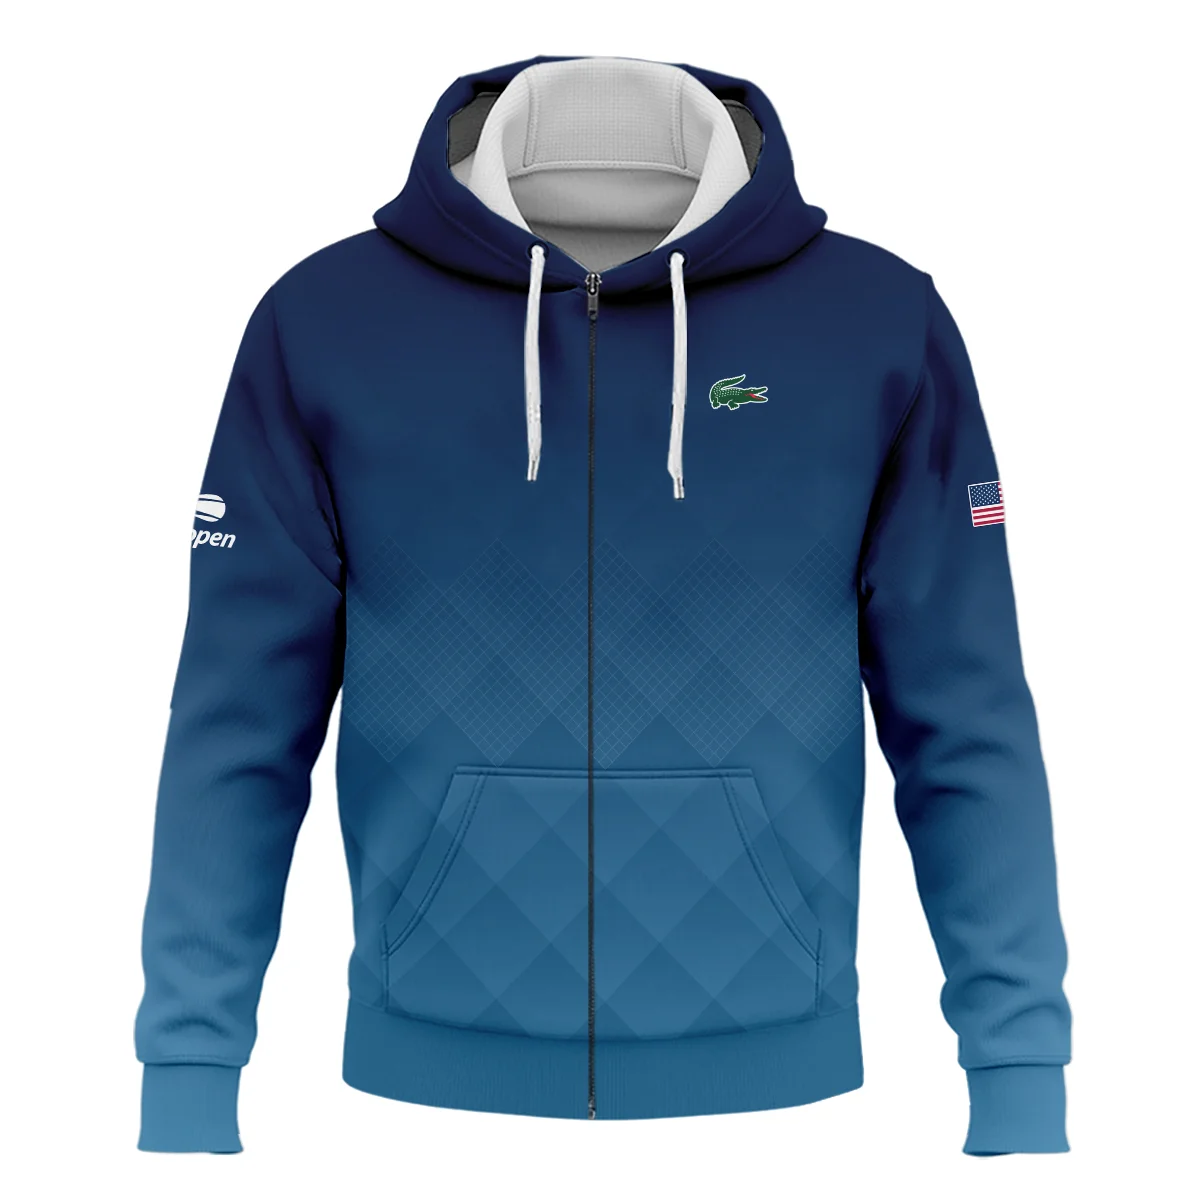 Lacoste Blue Abstract Background US Open Tennis Champions Hoodie Shirt Style Classic Hoodie Shirt